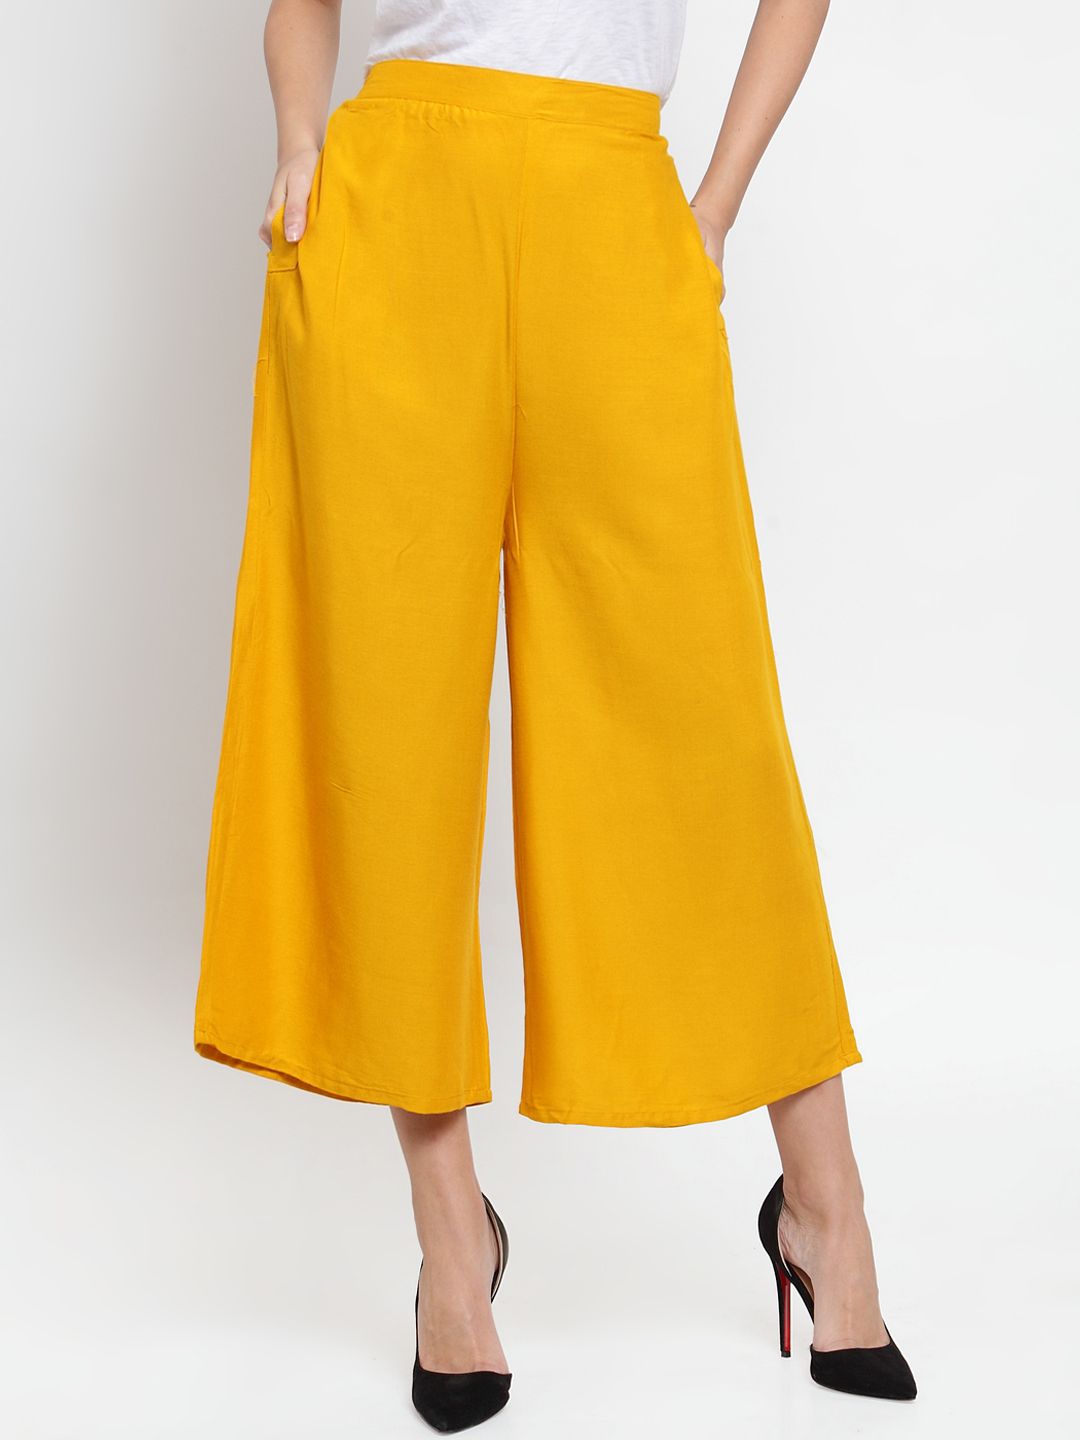 Clora Creation Women Mustard Yellow Smart Regular Fit Solid Culottes Price in India